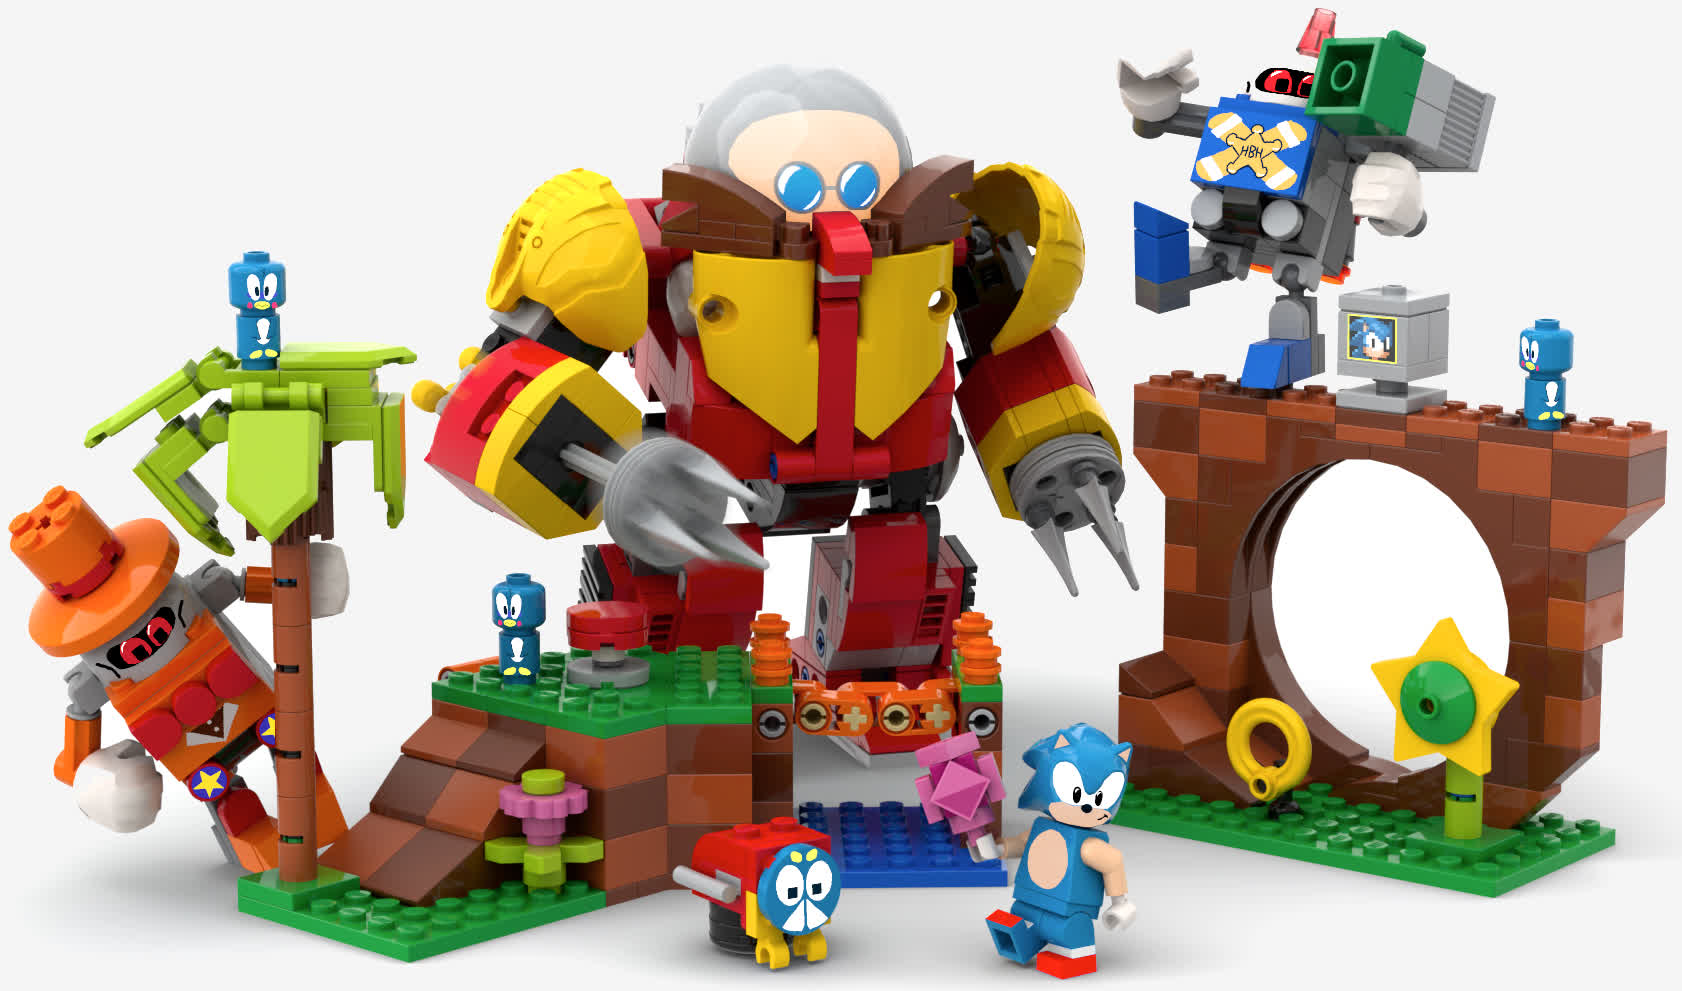 Lego is building a Sonic the Hedgehog-themed playset based on a fan idea